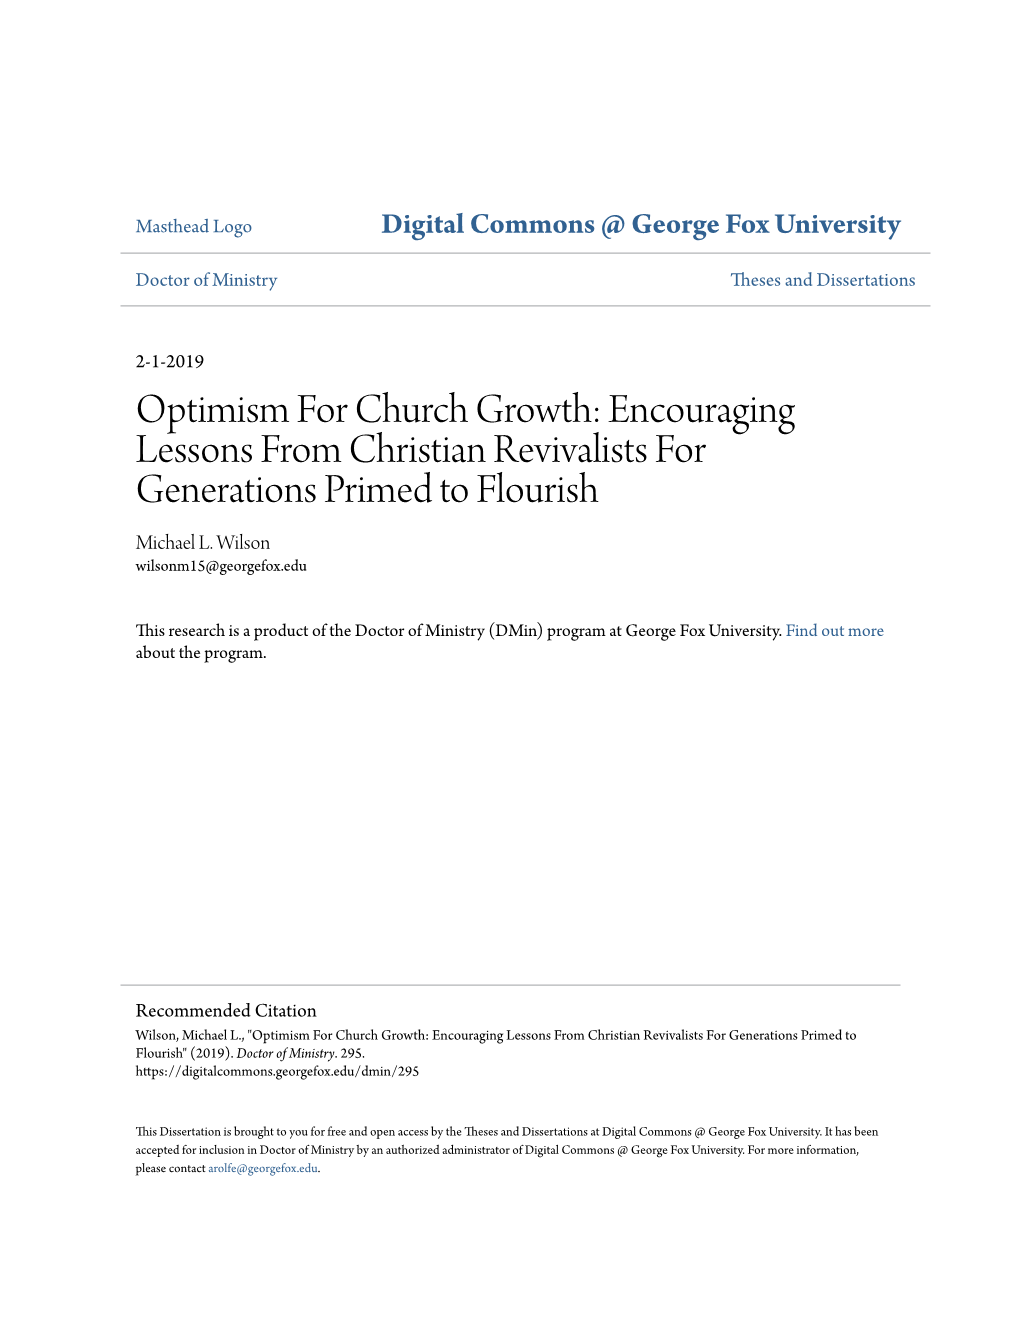 Optimism for Church Growth: Encouraging Lessons from Christian Revivalists for Generations Primed to Flourish Michael L